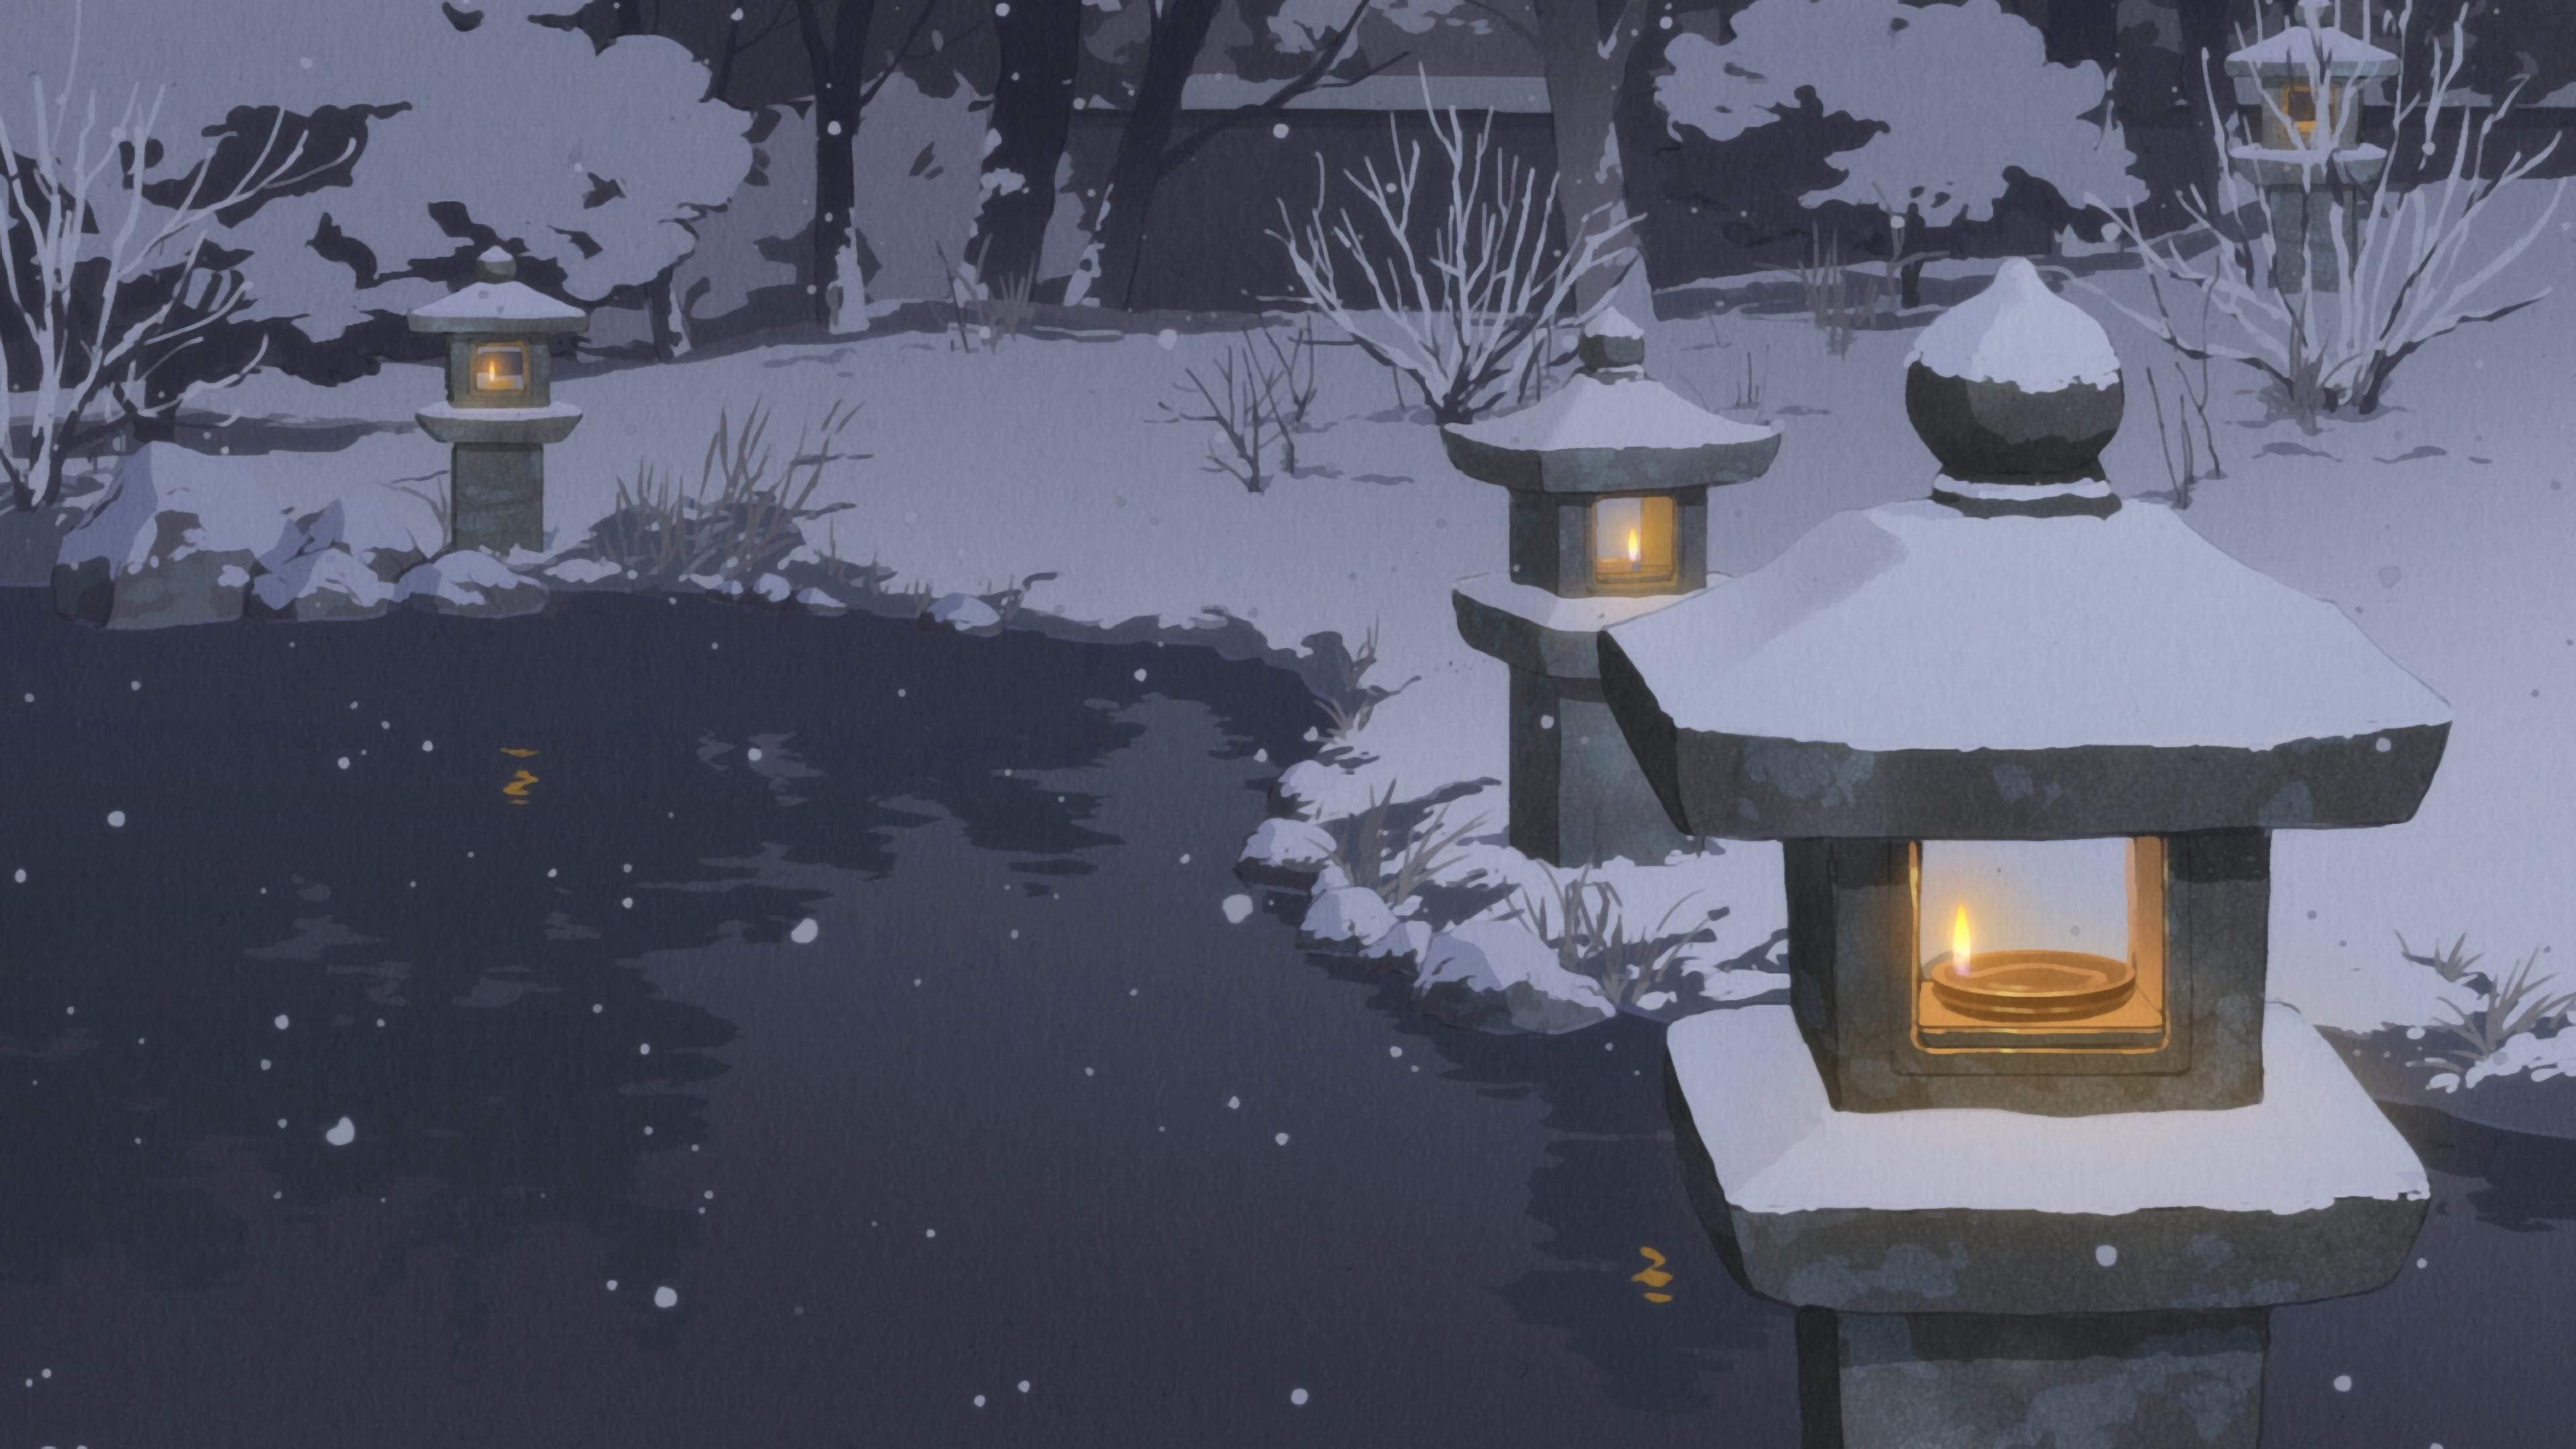 Snow Winter Drawing Anime Screenshot Pond Oil Lamp Asian Architecture Snowing 3840x2160